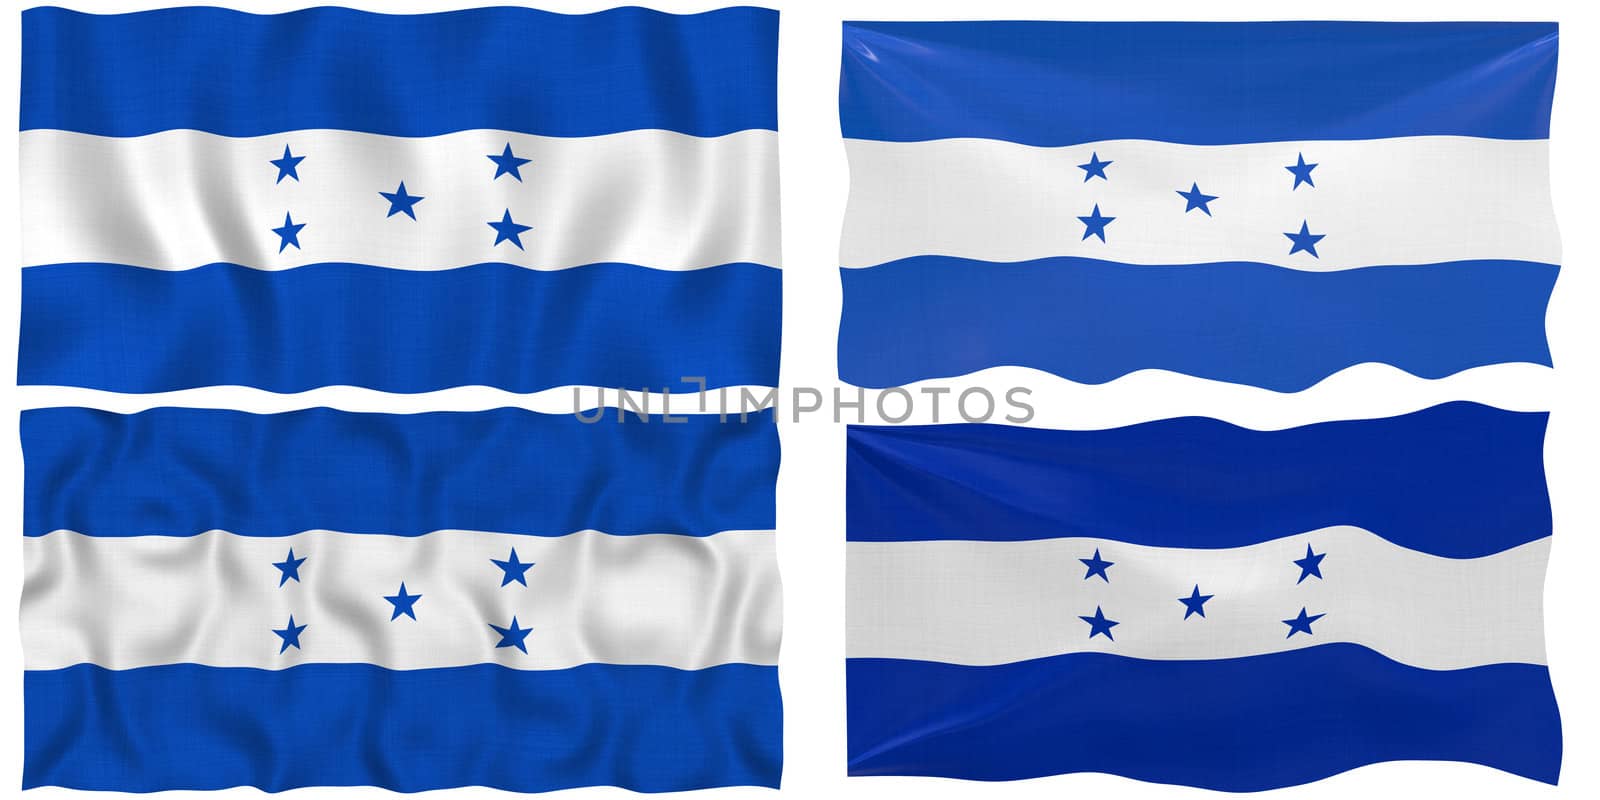 Great Image of the Flag of Honduras